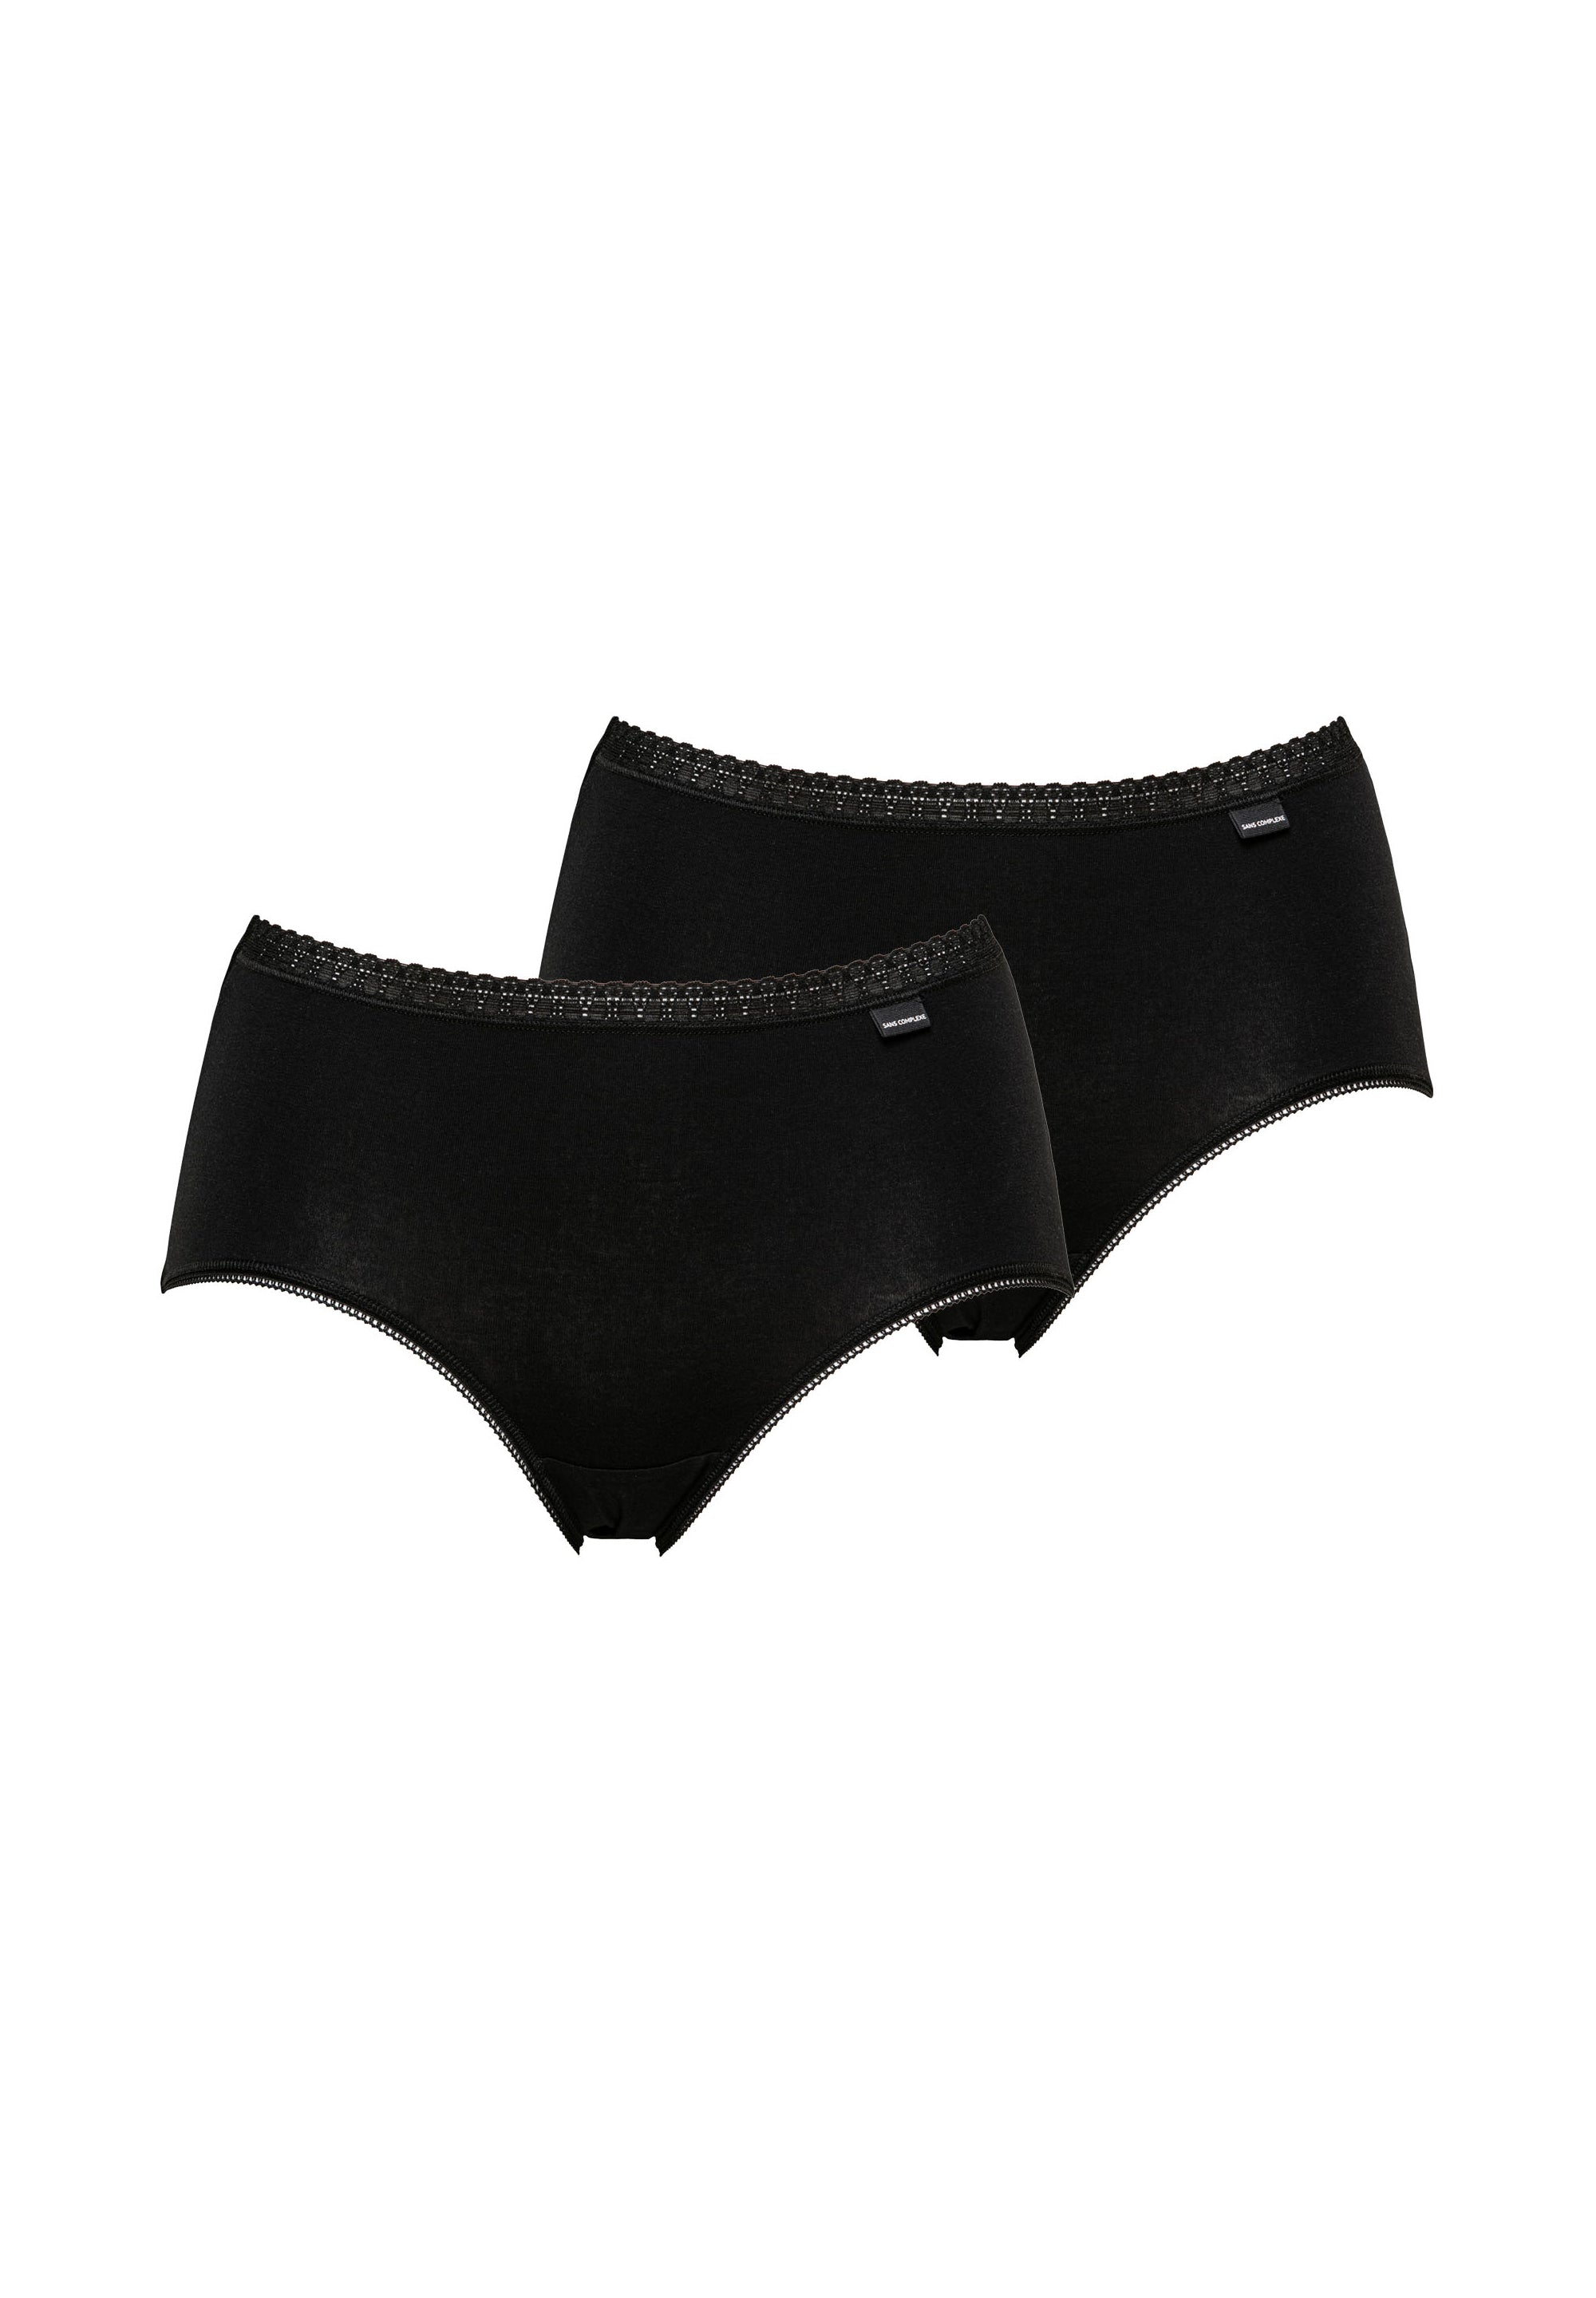 Briefs - Pack of 2 Classic Cotton Black